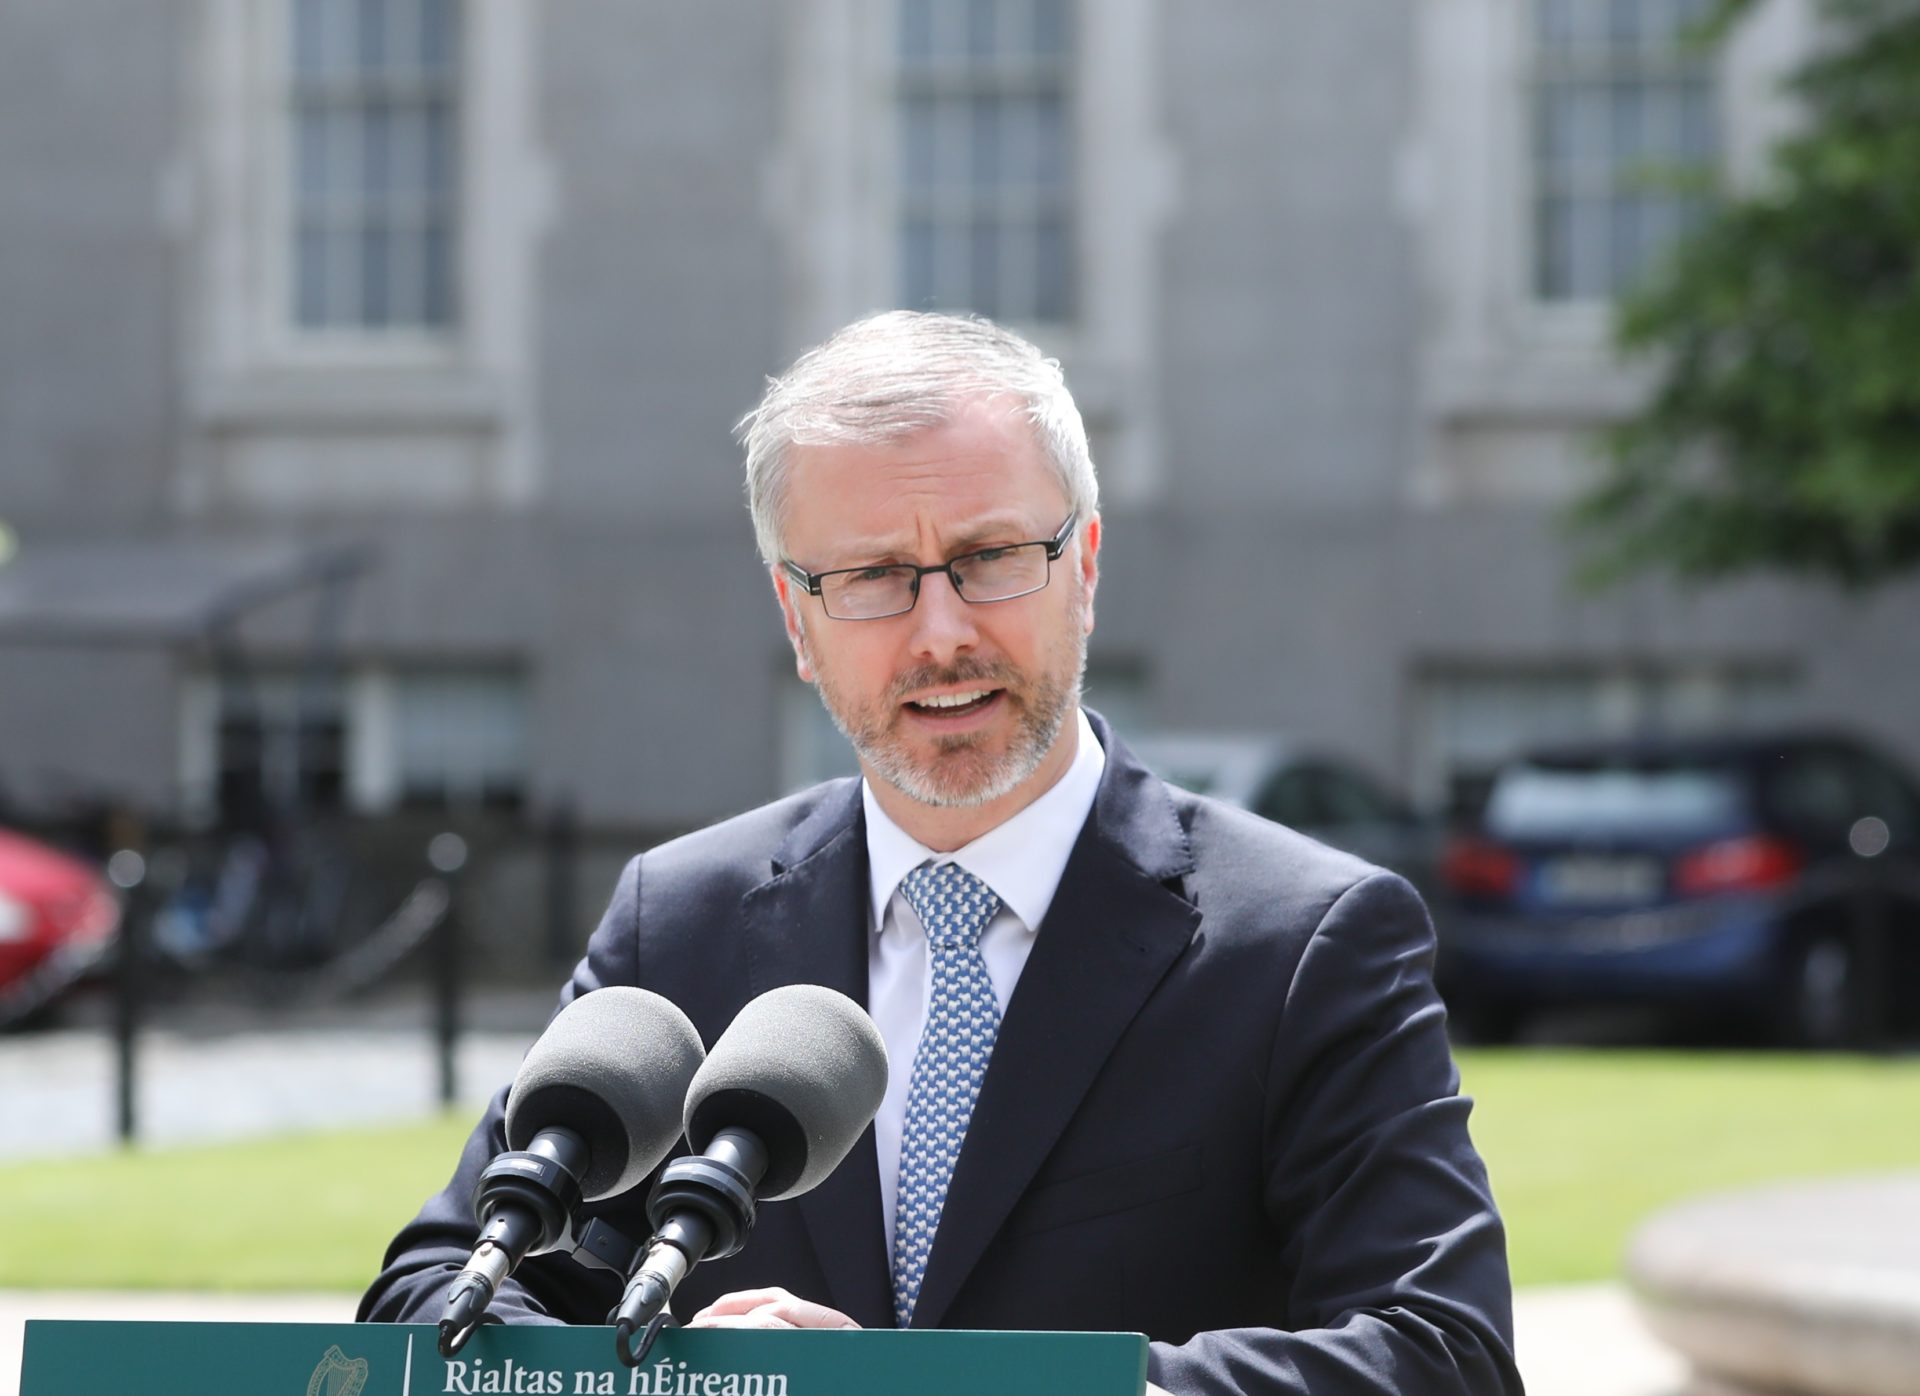 Minister Roderic O'Gorman outside Government Buildings briefing the media, 23-5-23.